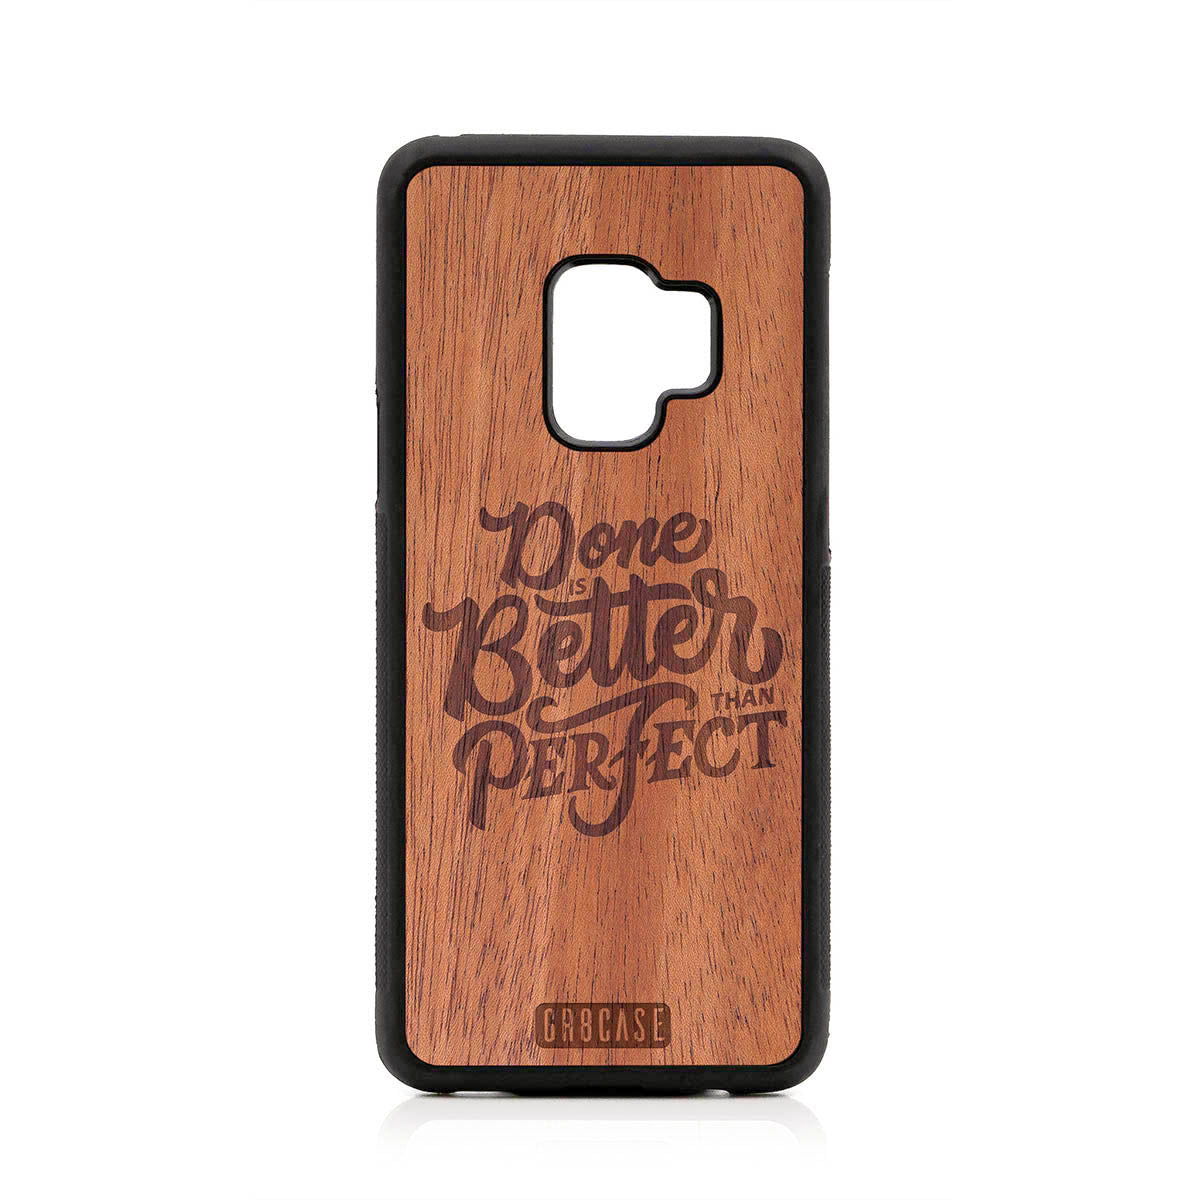 Done Is Better Than Perfect Design Wood Case For Samsung Galaxy S9 by GR8CASE